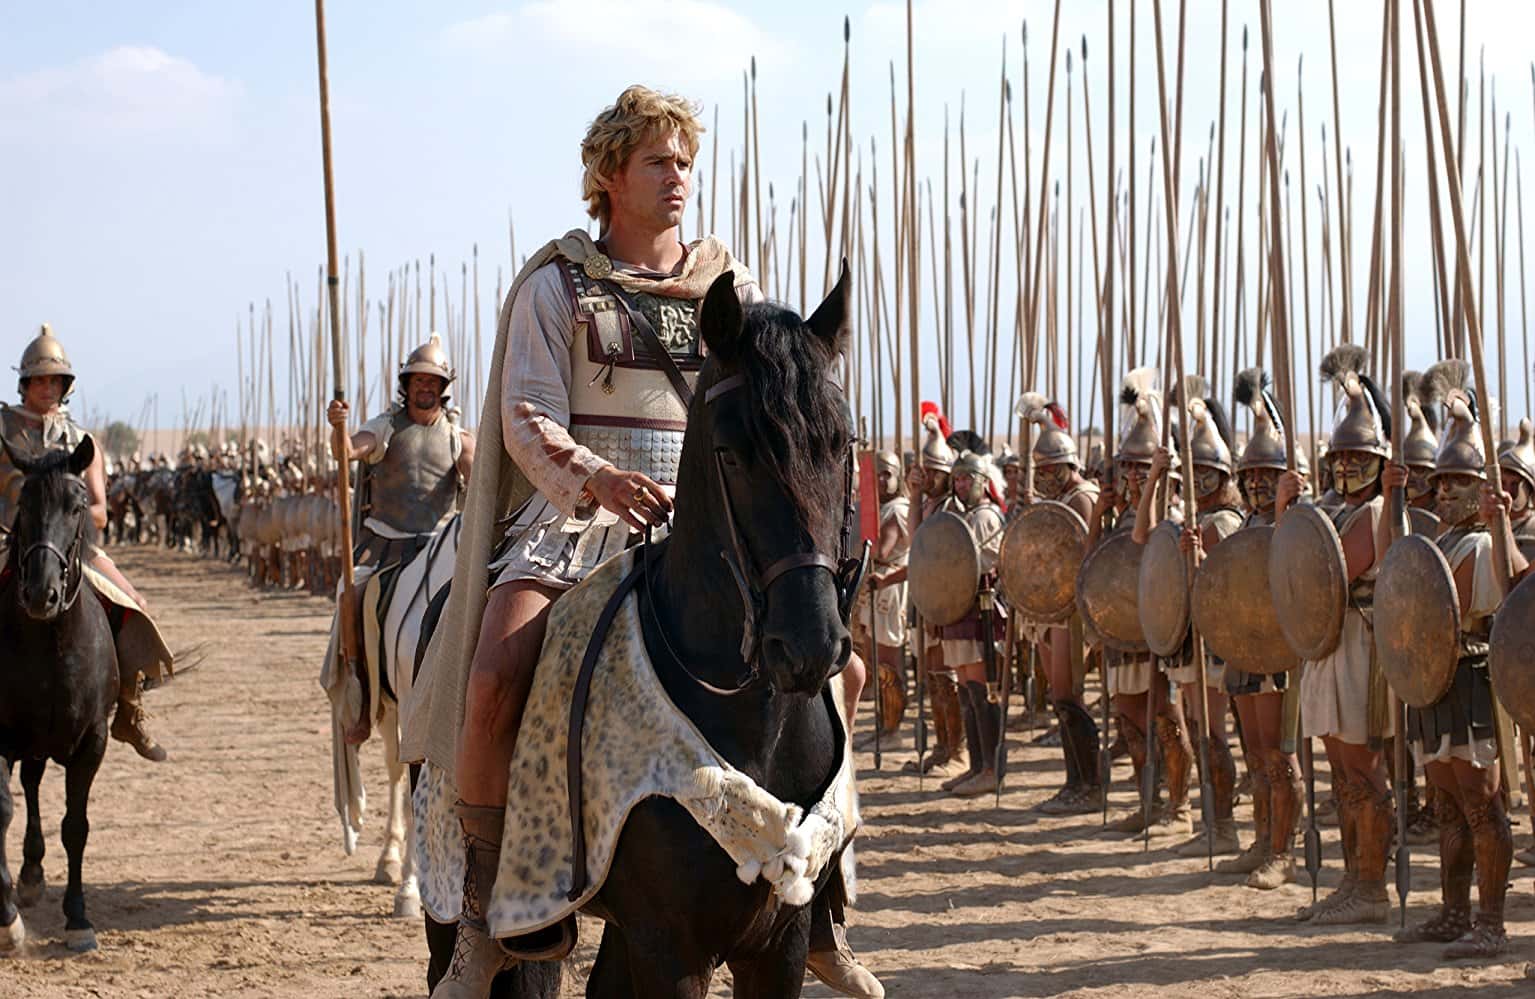 Alexander the Great facts 